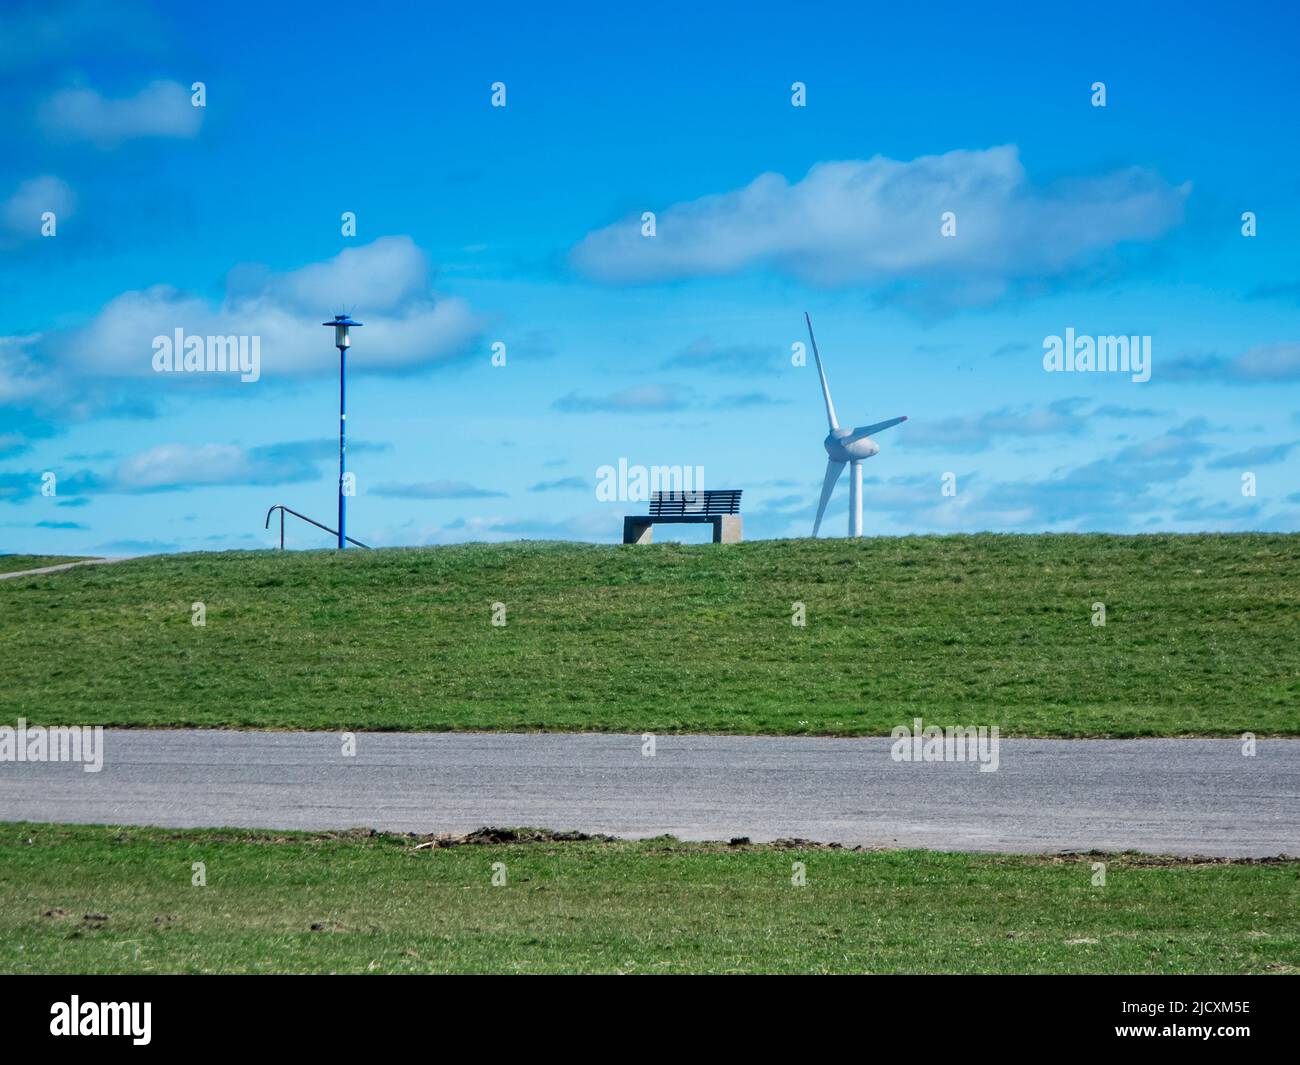 Landscape view of the German North Sea coast with a park bench on the dyke and a street lamp next to it, as well as a wind turbine in the background a Stock Photo